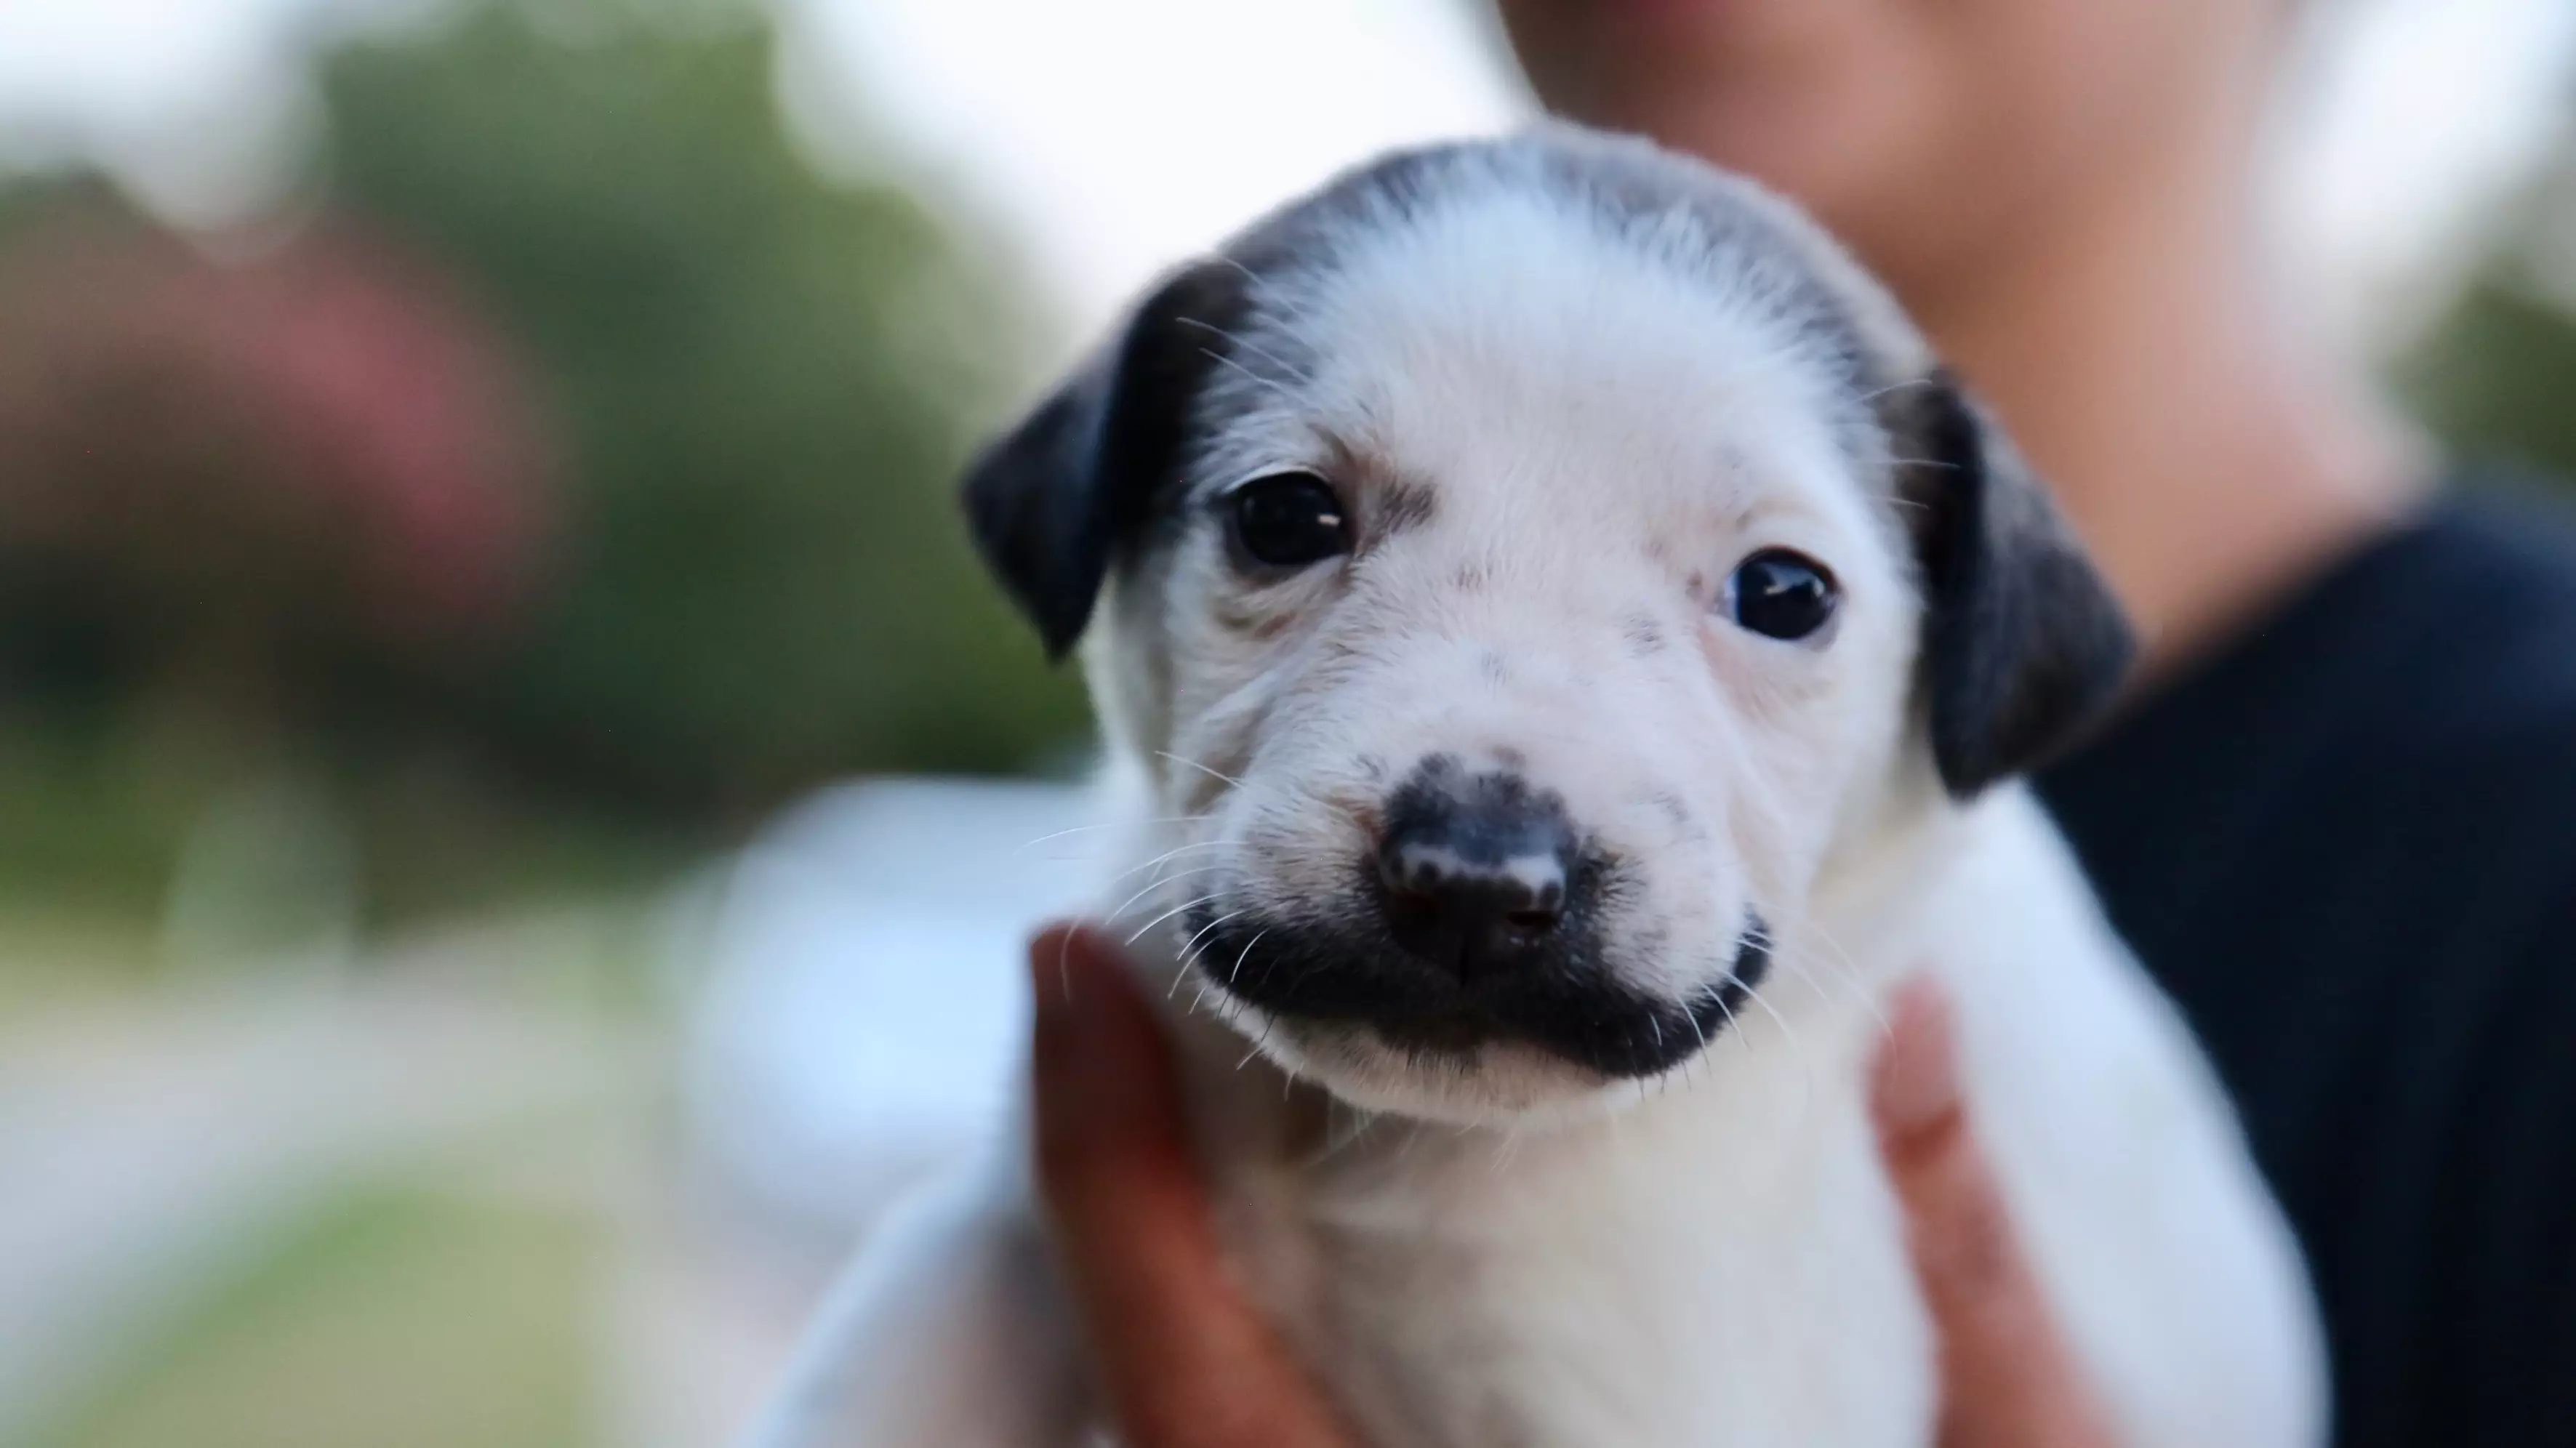 Adorable Puppy With A Moustache Is Up For Adoption And We Want Her